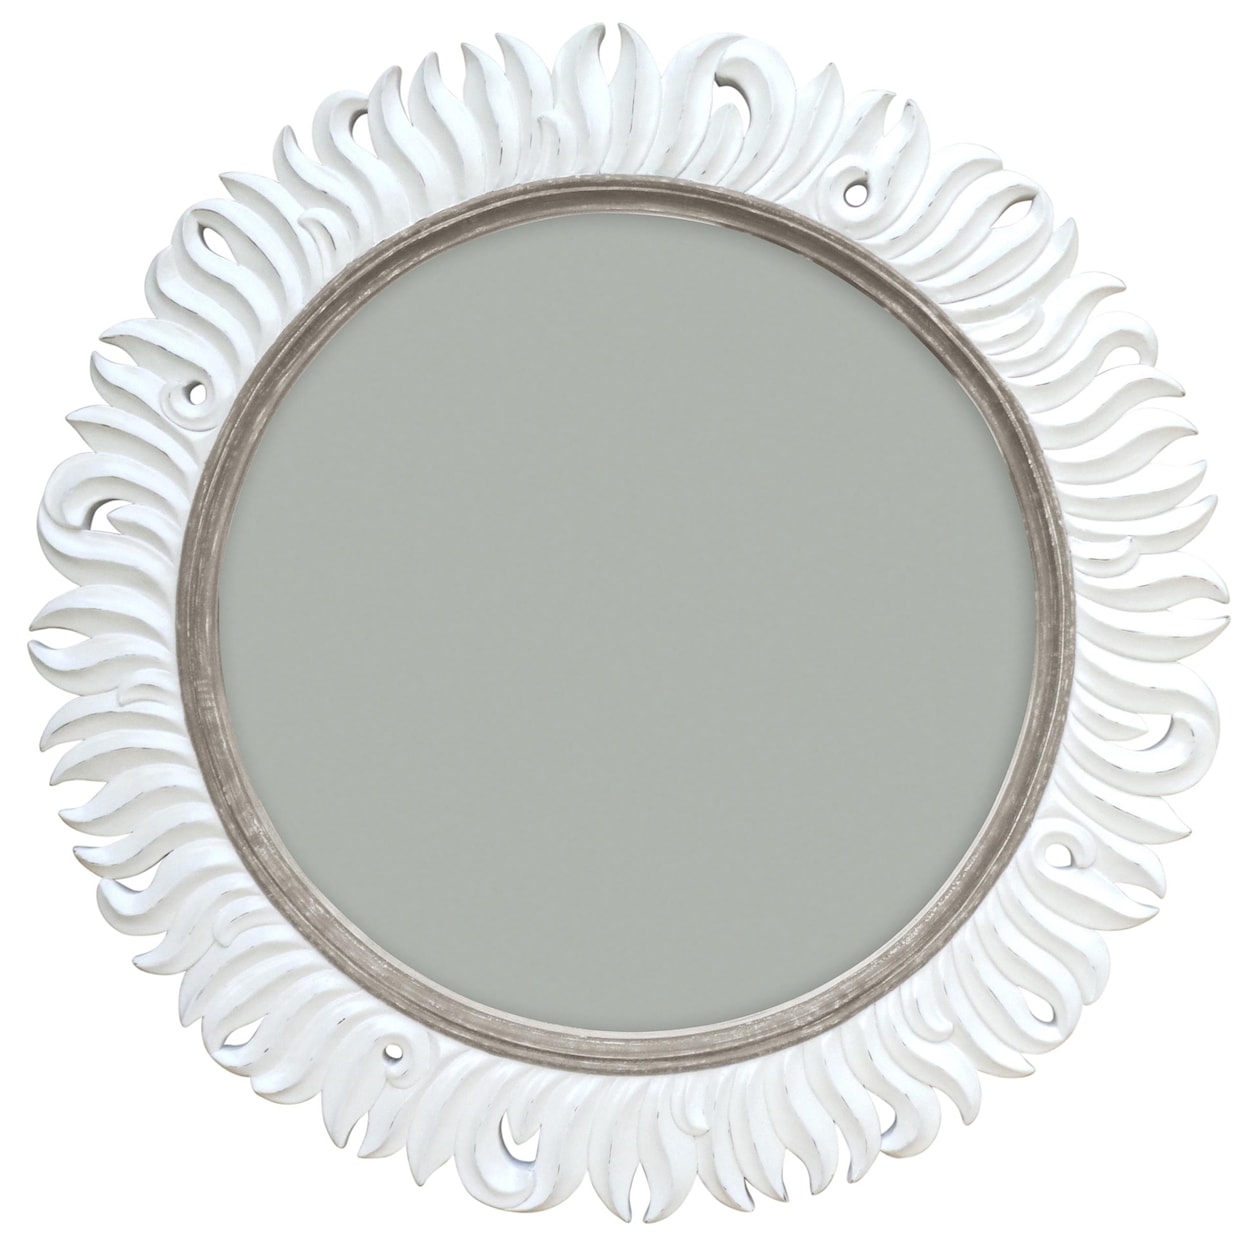 Trade Winds Furniture Accents and Accessories Sol Mirror